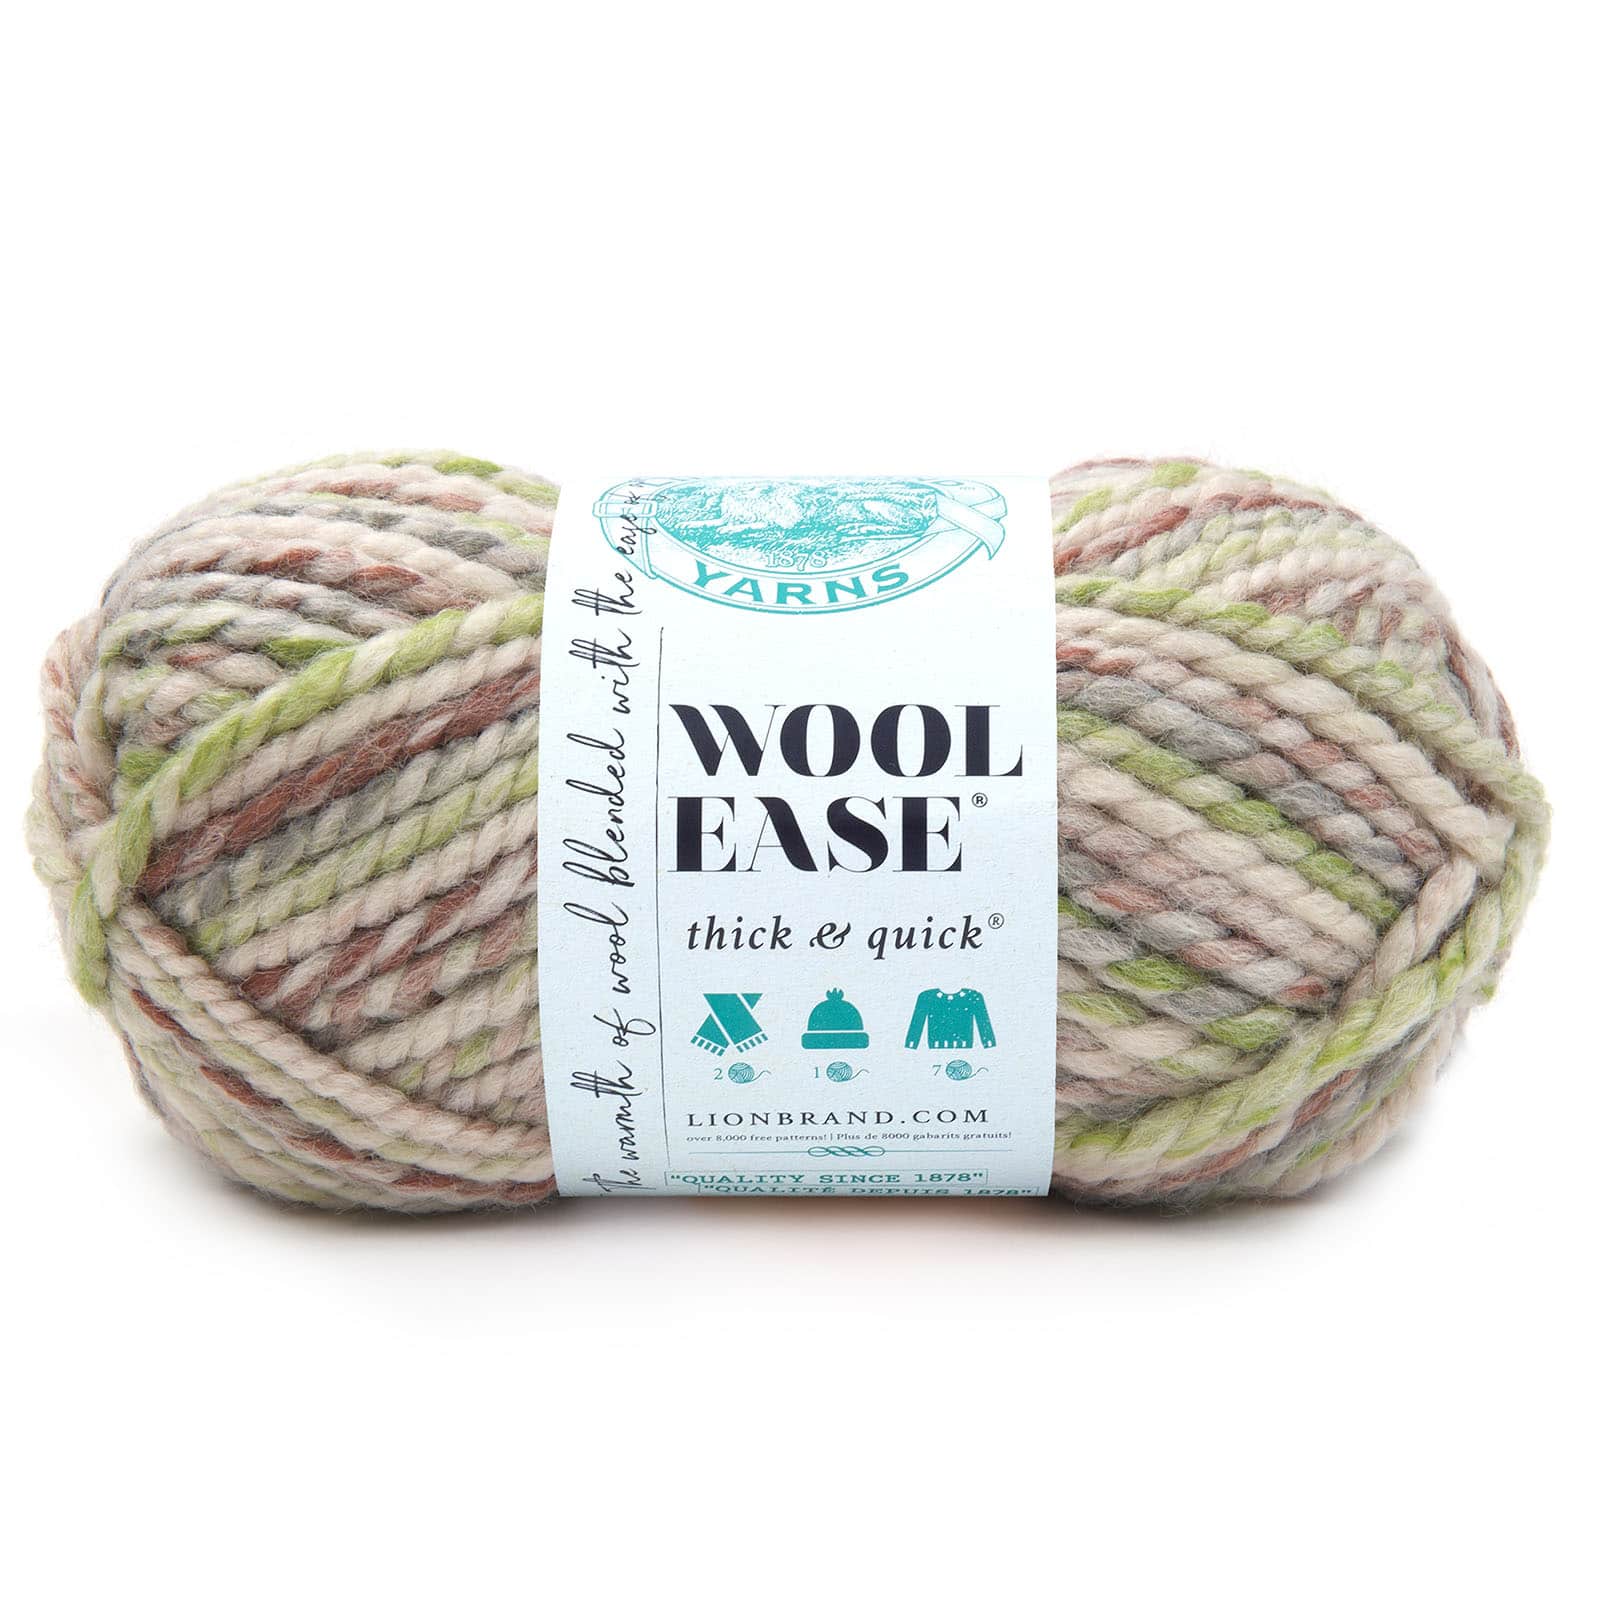 Lion Brand Wool-Ease Thick & Quick Yarn-Storm Front, 1 count